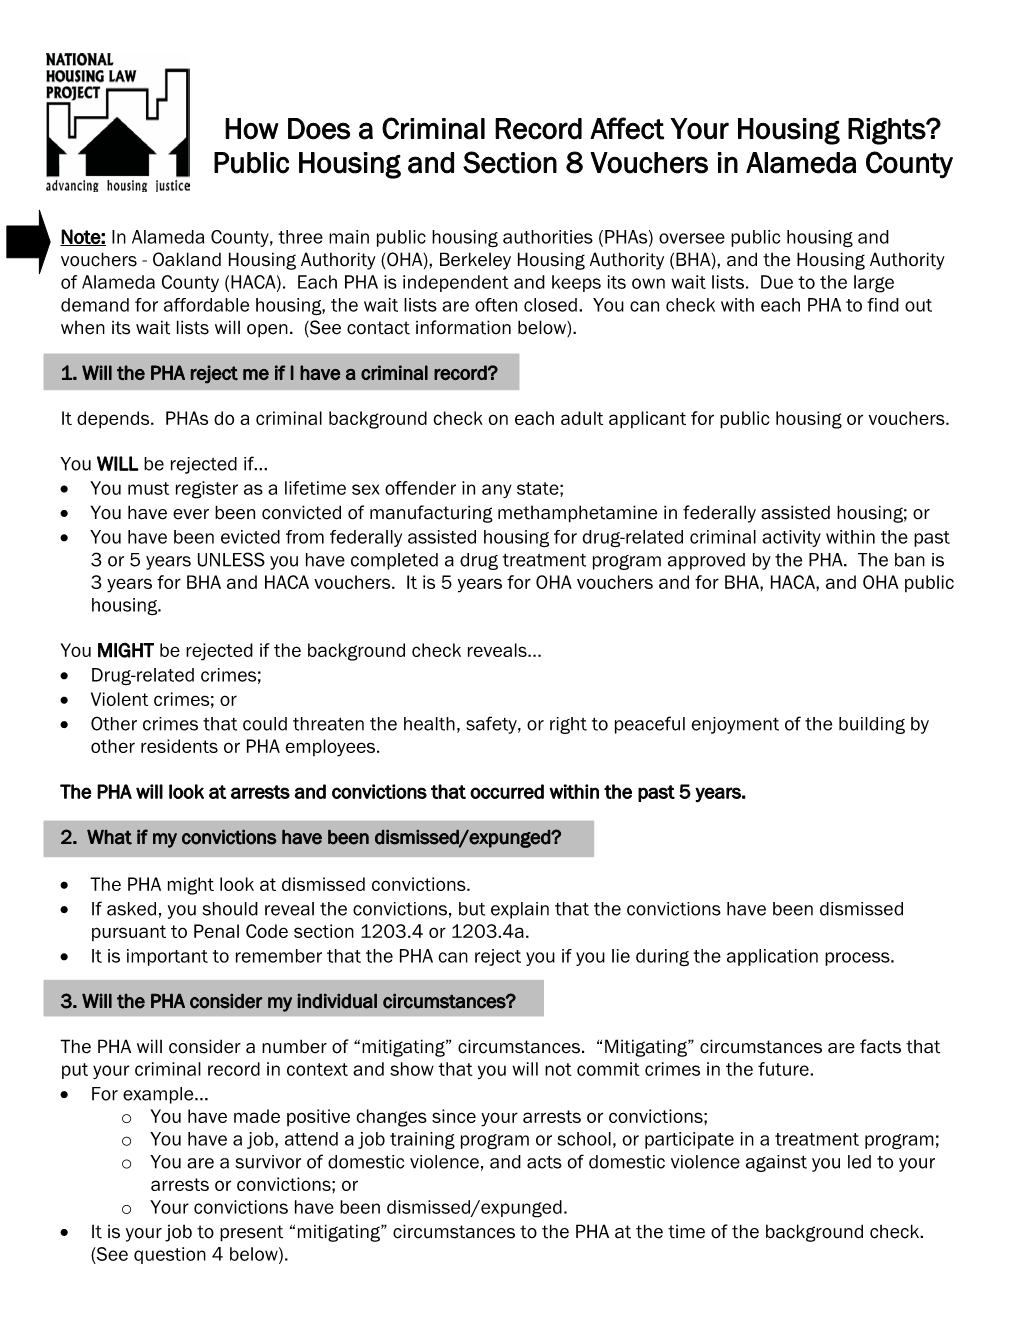 Public Housing and Section 8 Vouchers in Alameda County